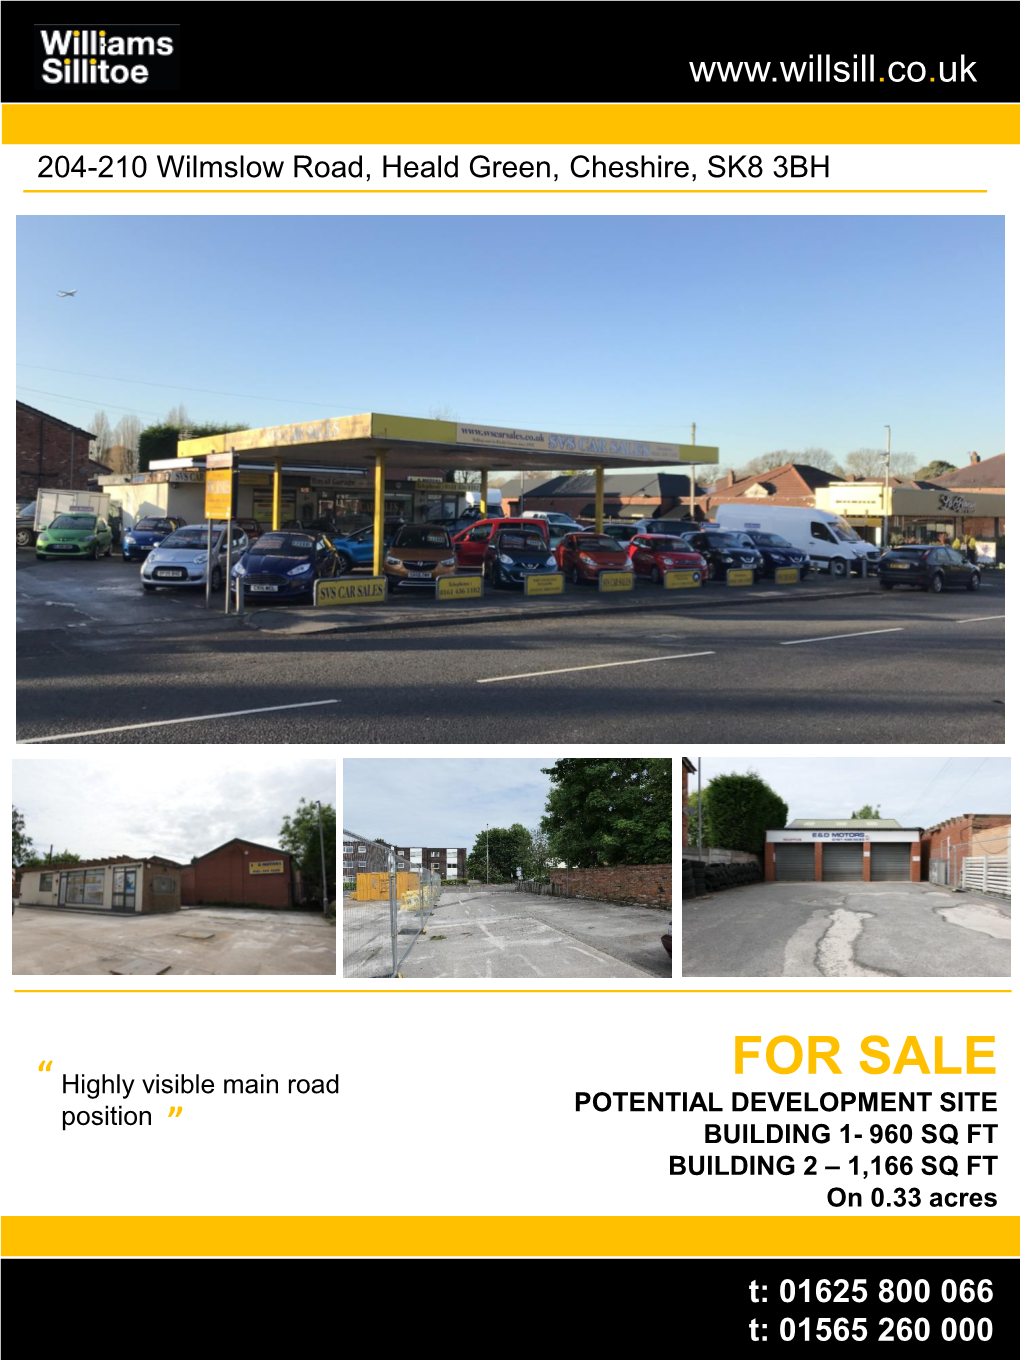 FOR SALE “ Highly Visible Main Road POTENTIAL DEVELOPMENT SITE Position BUILDING 1- 960 SQ FT BUILDING 2 – 1,166 SQ FT on 0.33 Acres